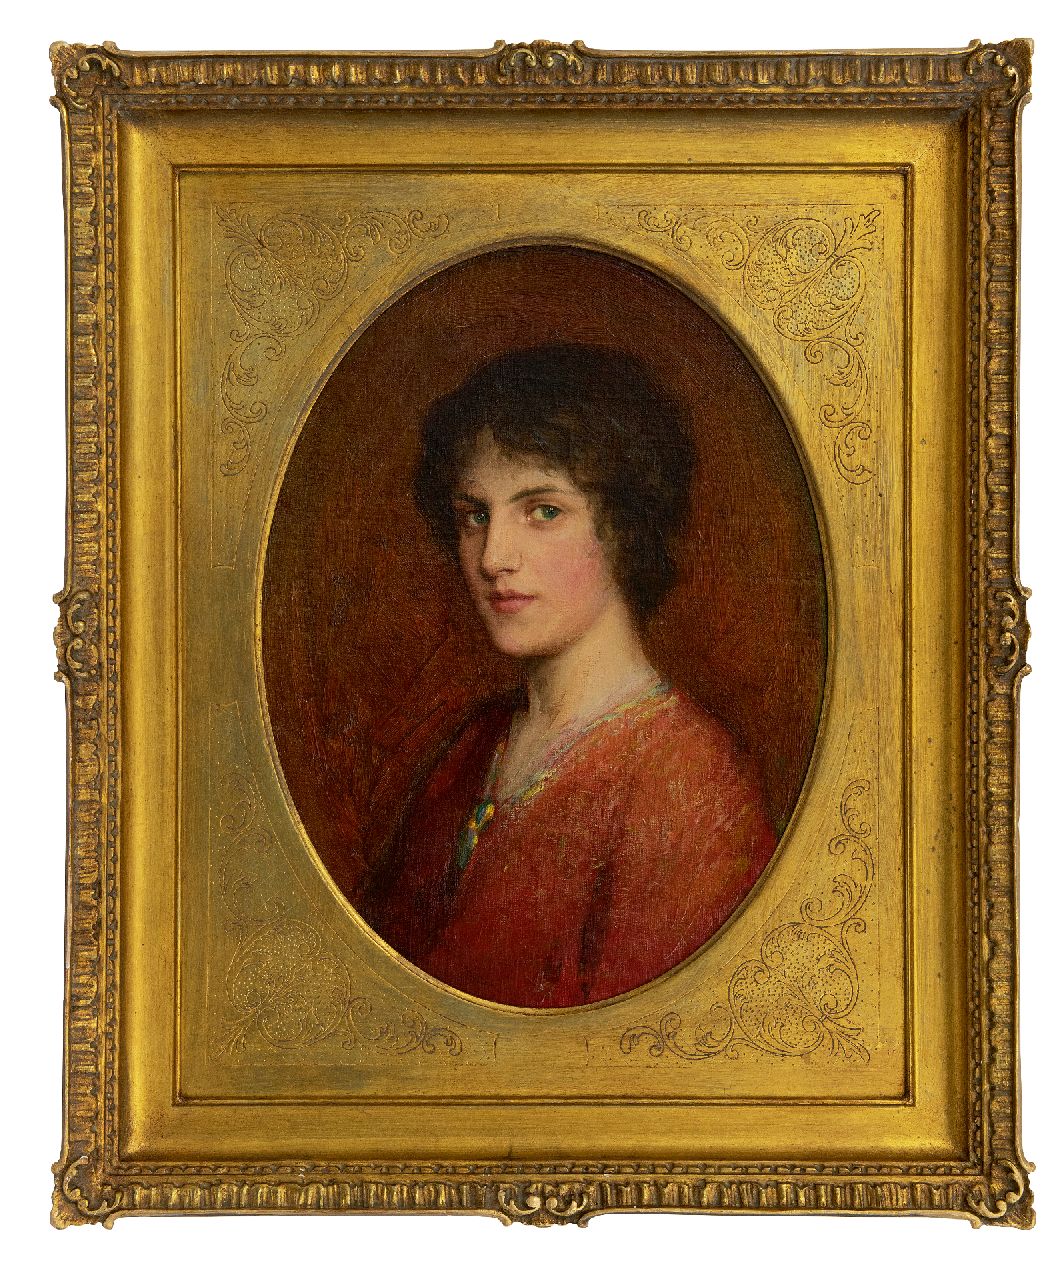 Perugini C.E.  | 'Charles' Edward Perugini | Paintings offered for sale | Portrait of a young woman (possibly Kate Perugini), oil on painter's board 40.0 x 30.3 cm, signed l.r. with monogram